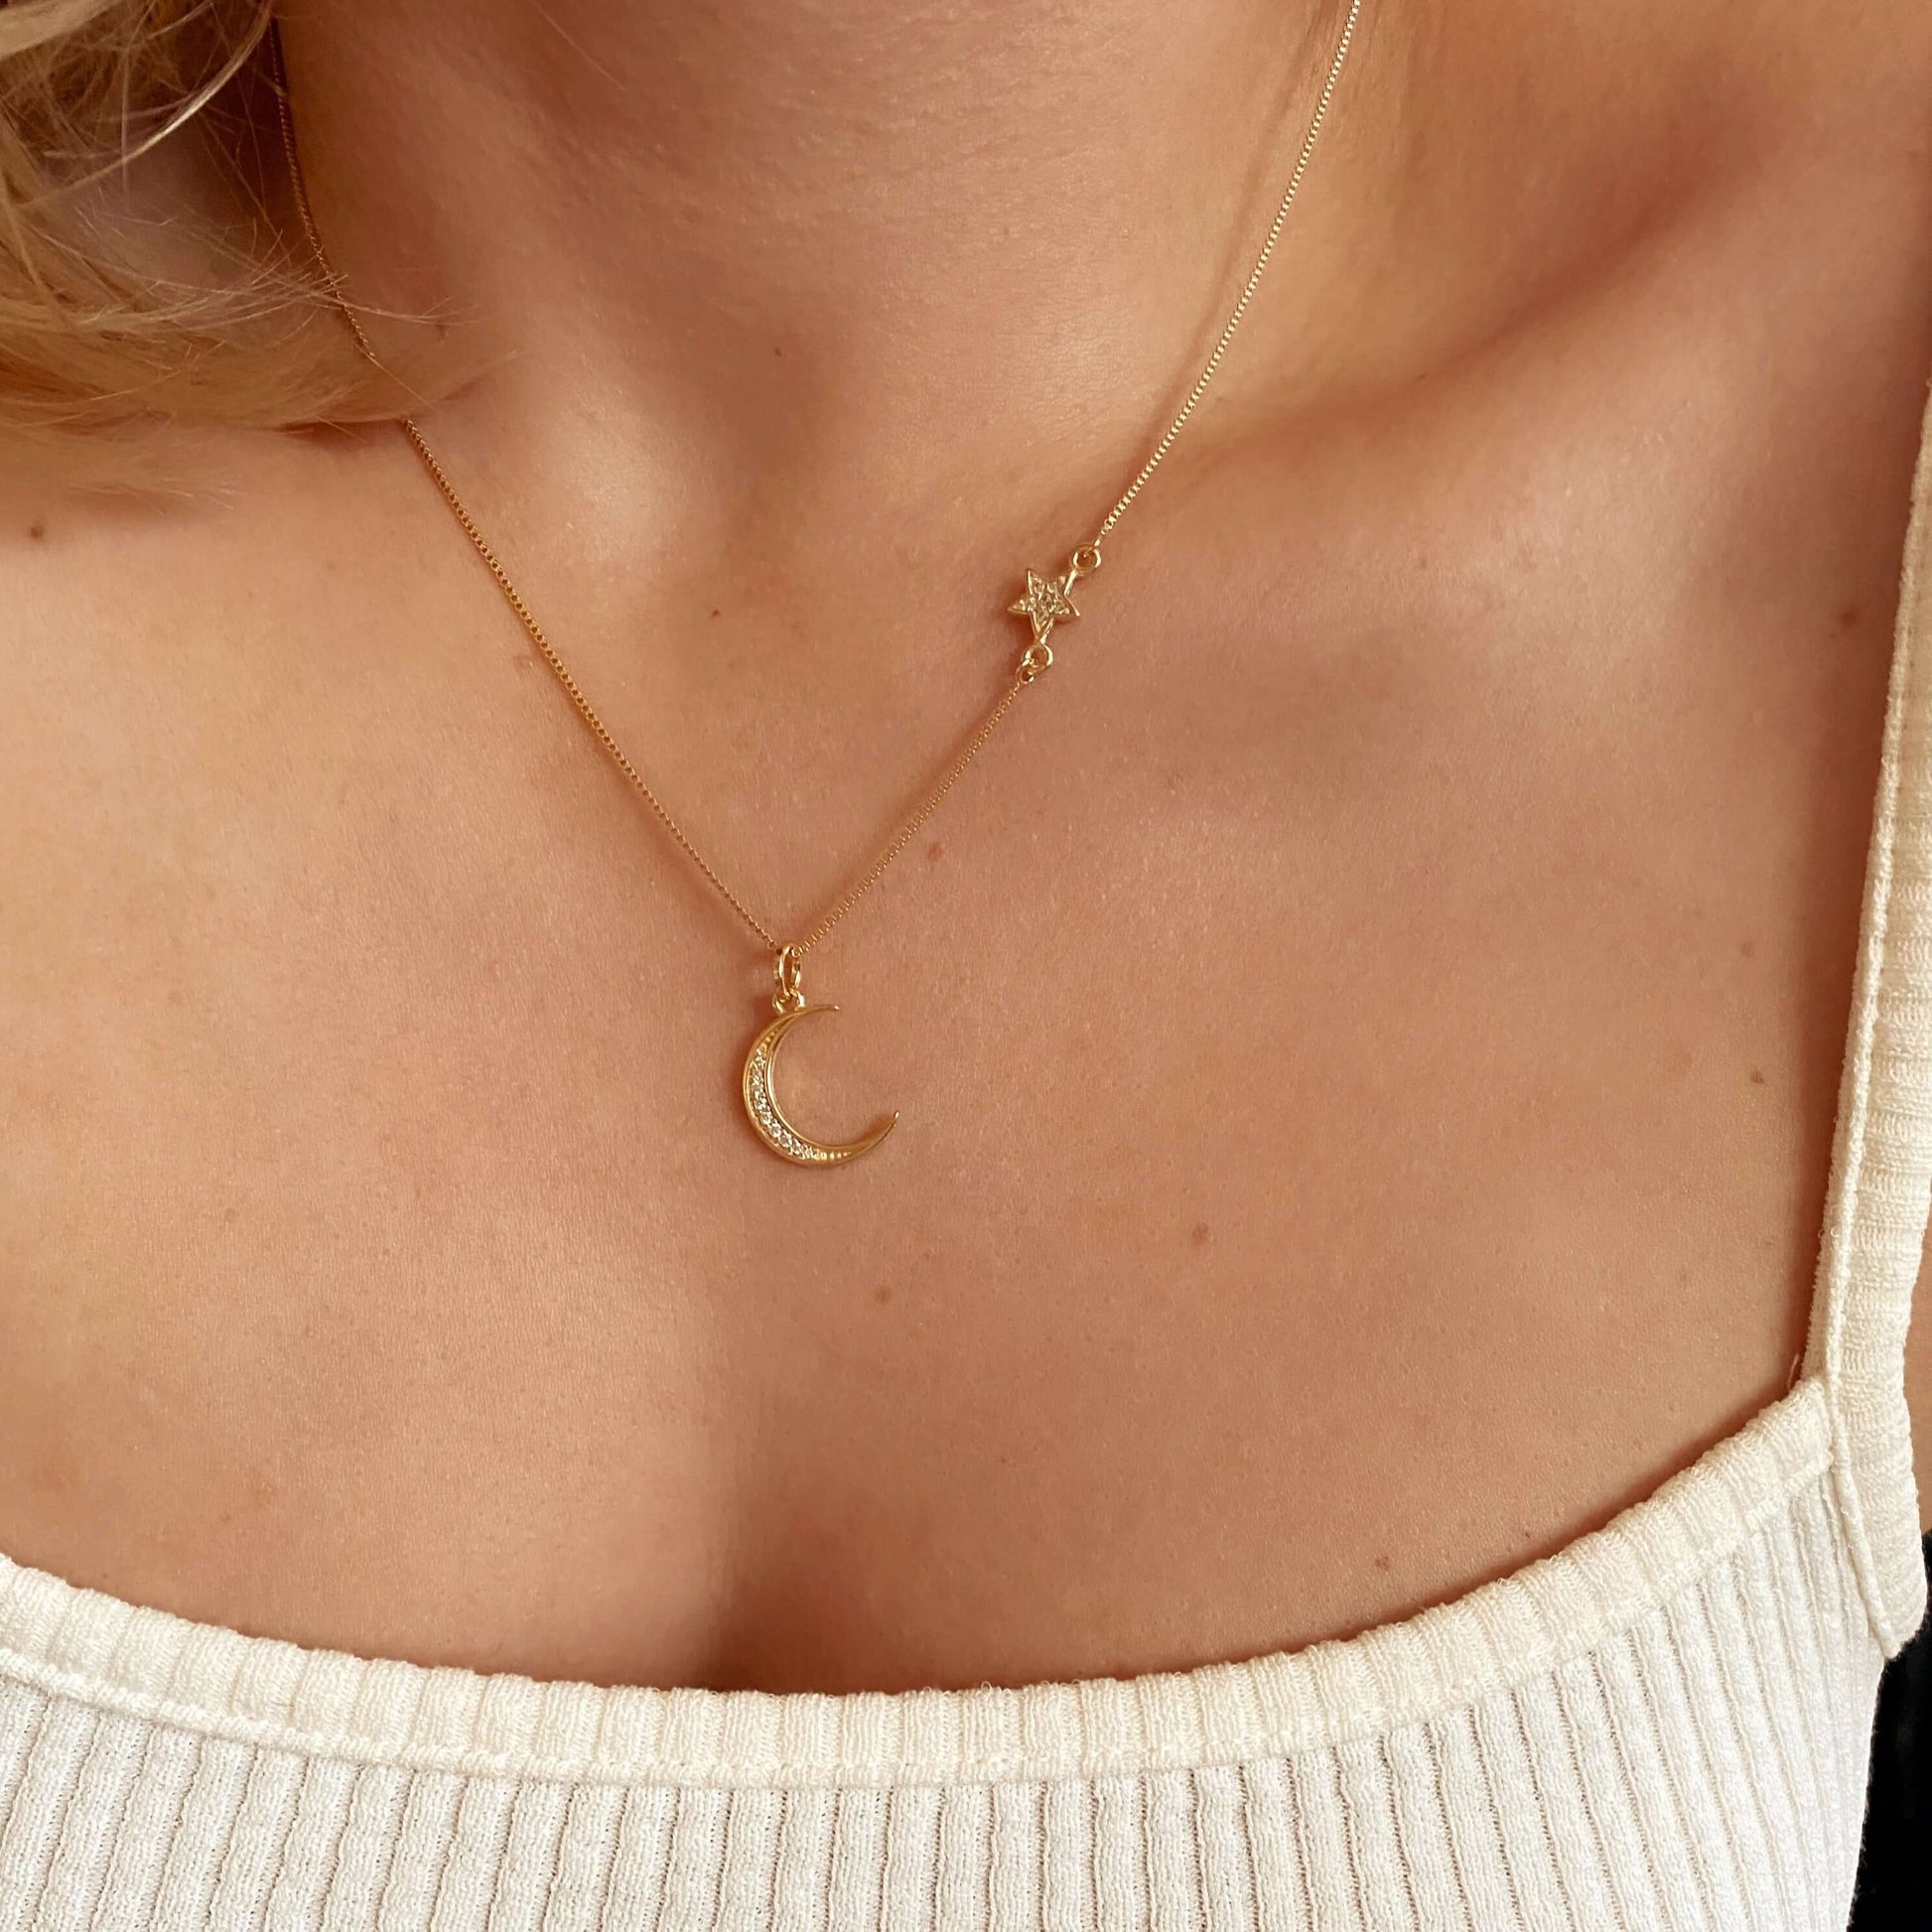 GoldFi Moon and Star Necklace 18k Gold Filled